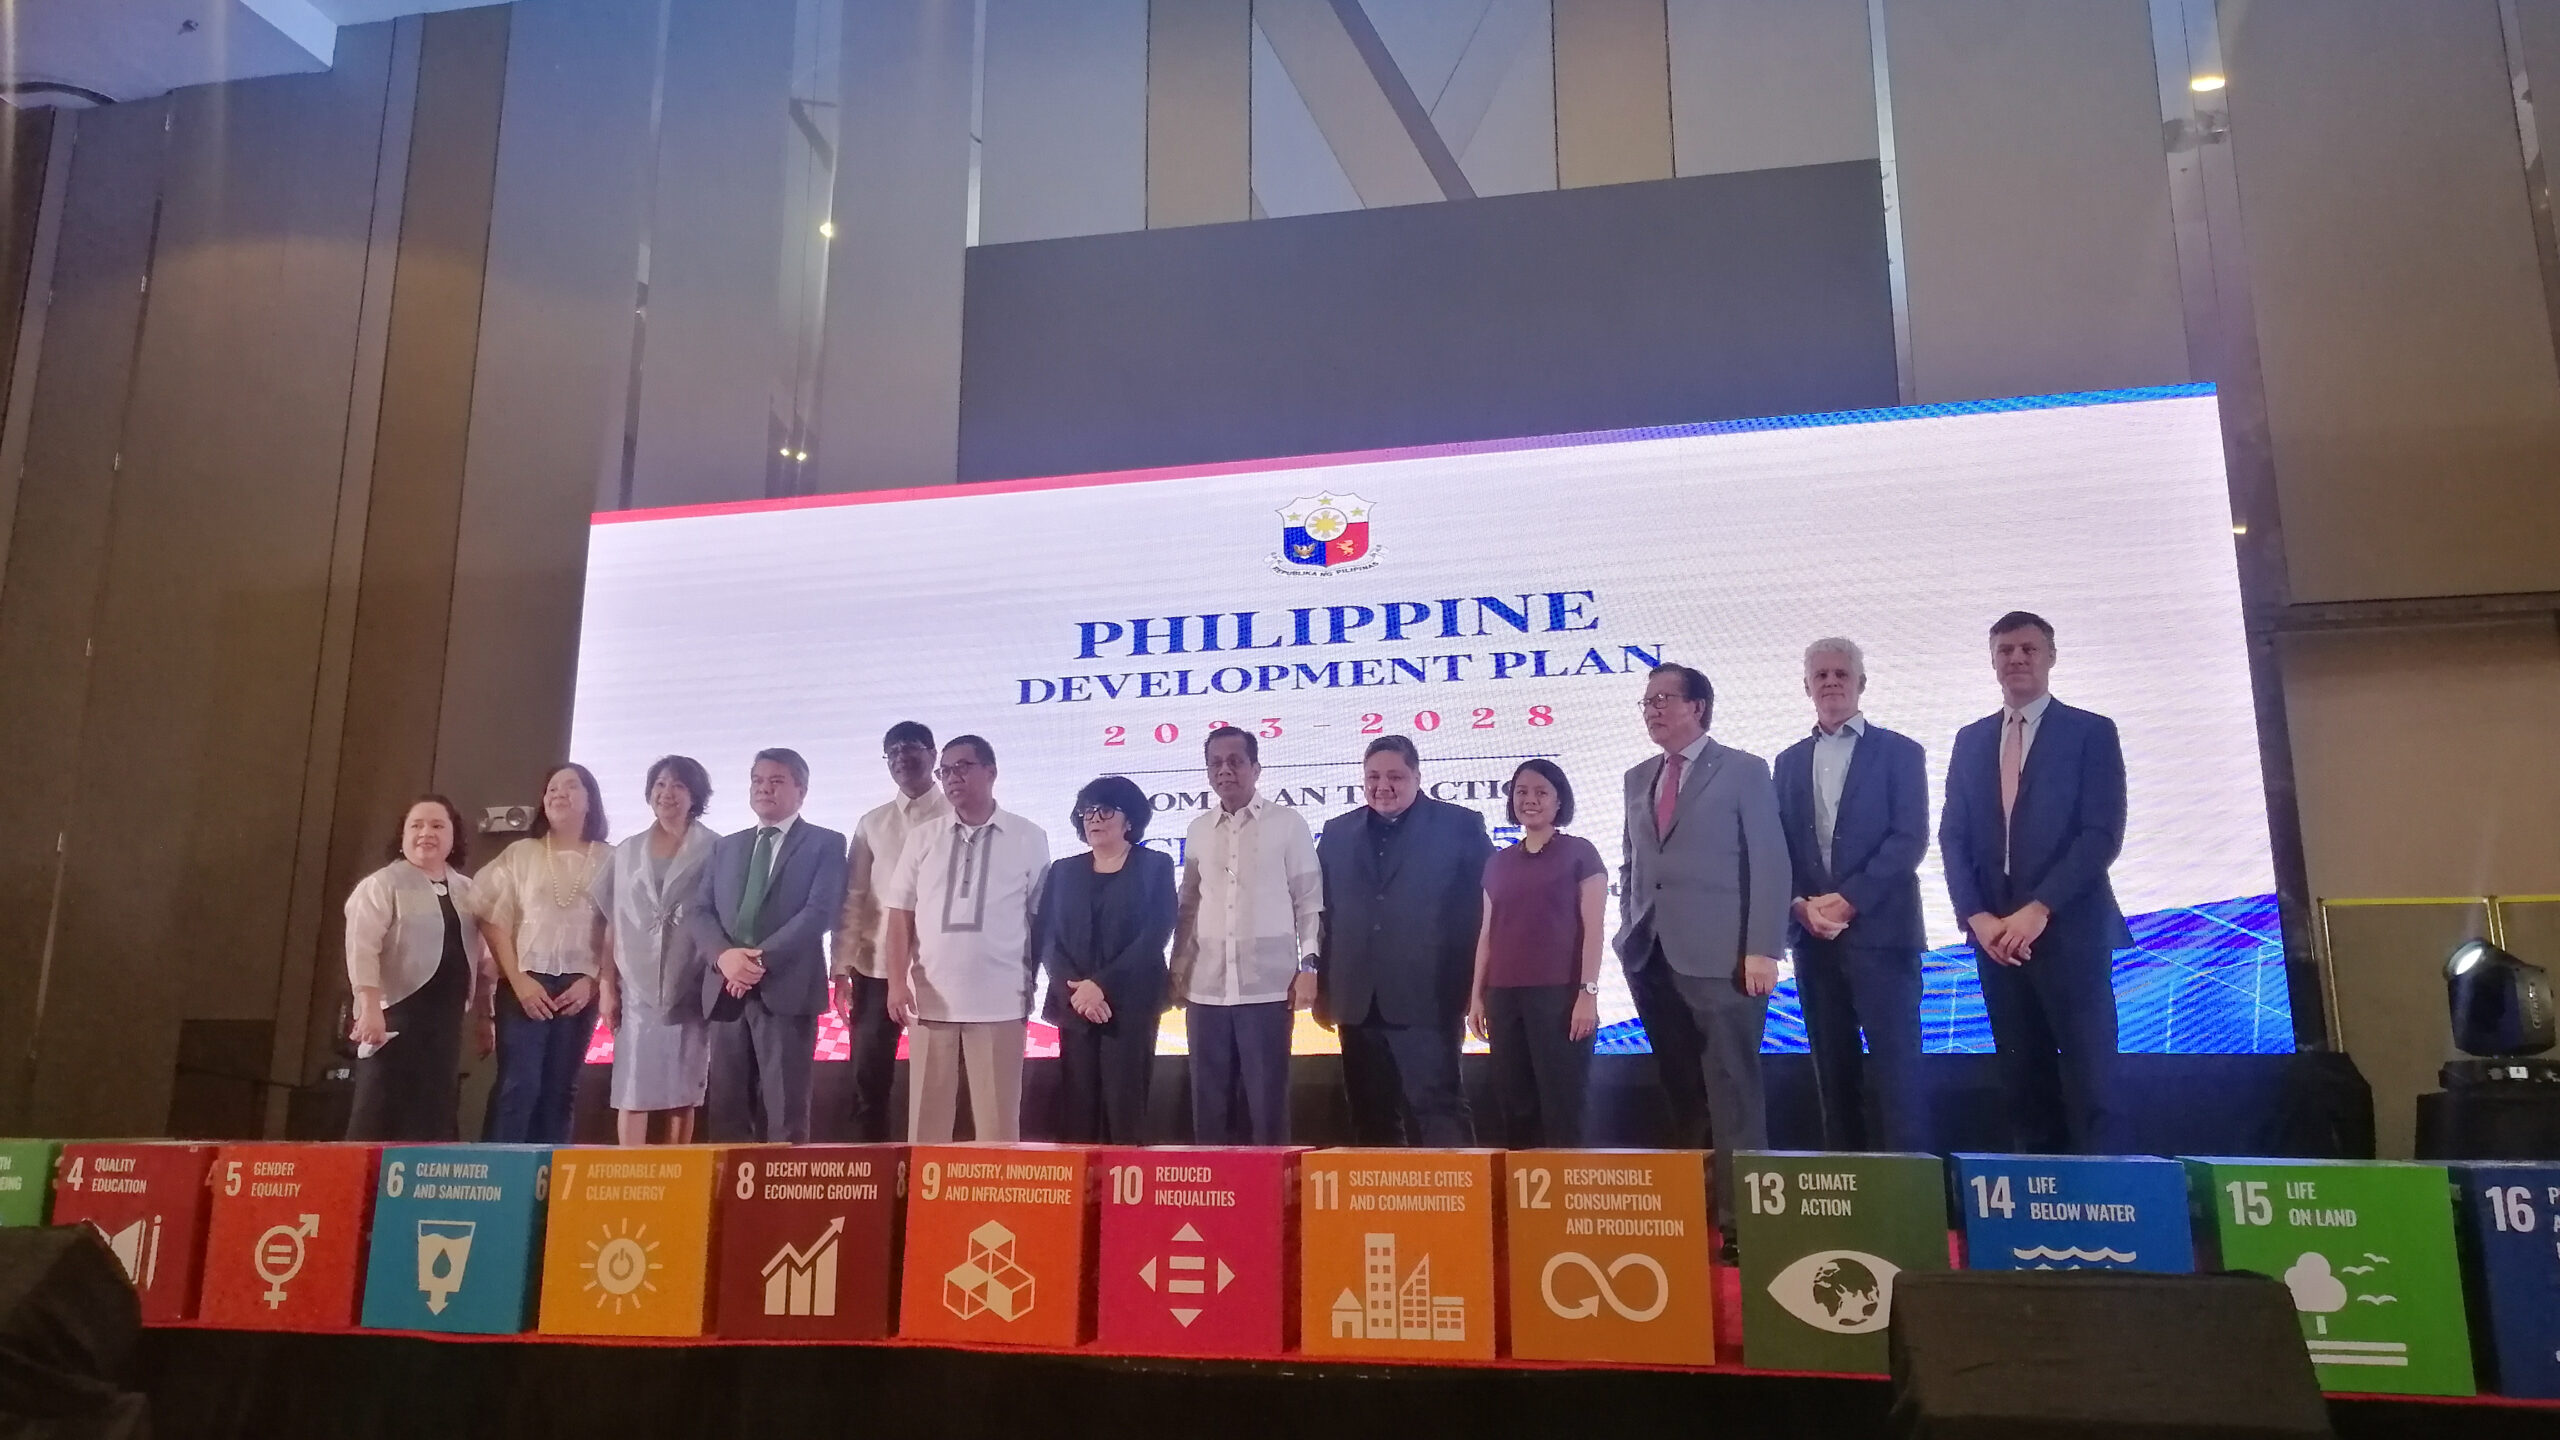 Philippines’ high-level executive dialogue in addressing climate change action